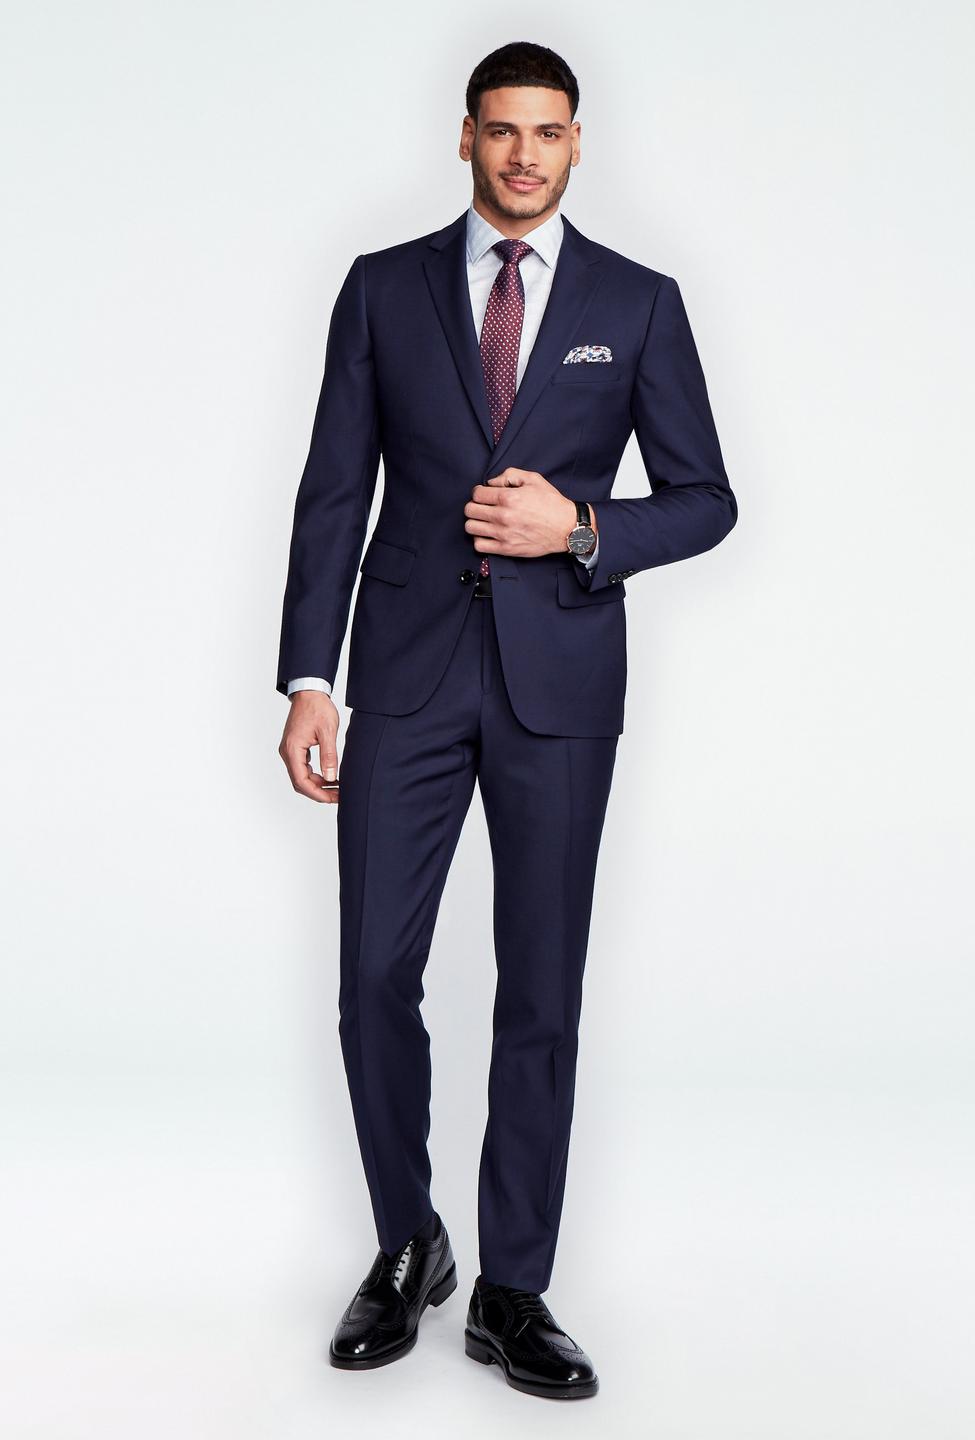 Navy suit - Hemsworth Solid Design from Premium Indochino Collection